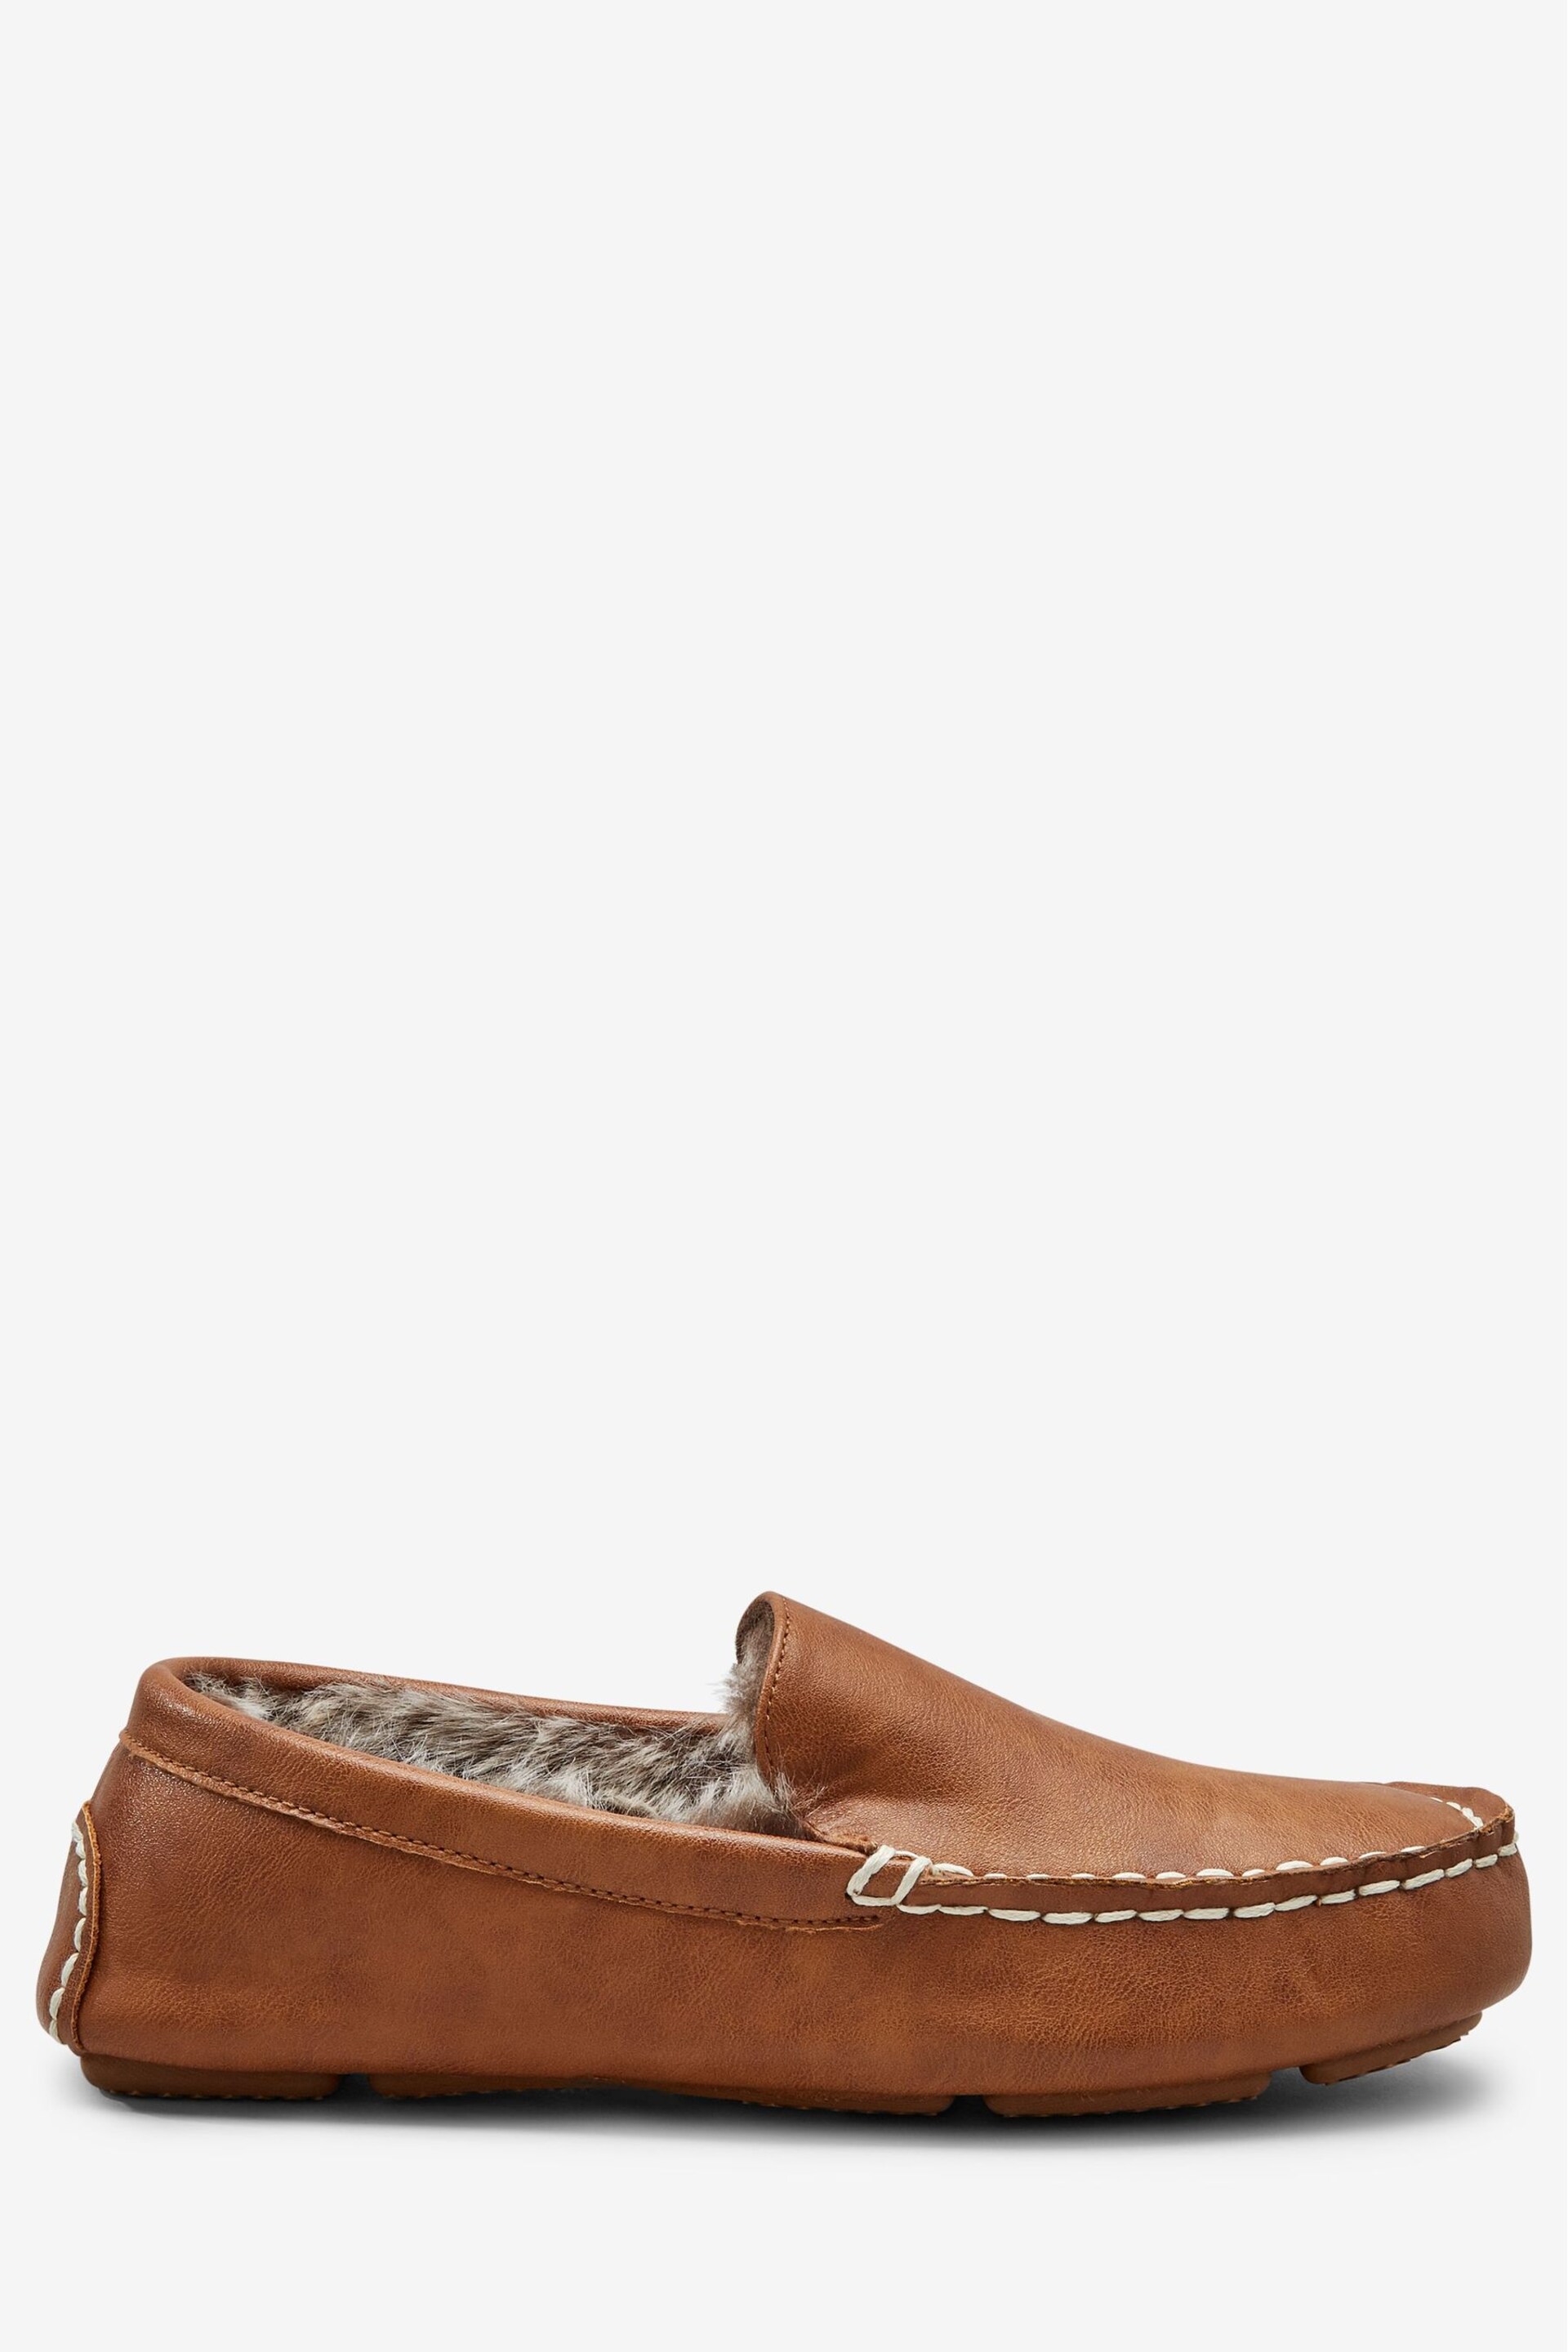 Tan Brown Moccasin Slippers - Image 2 of 6